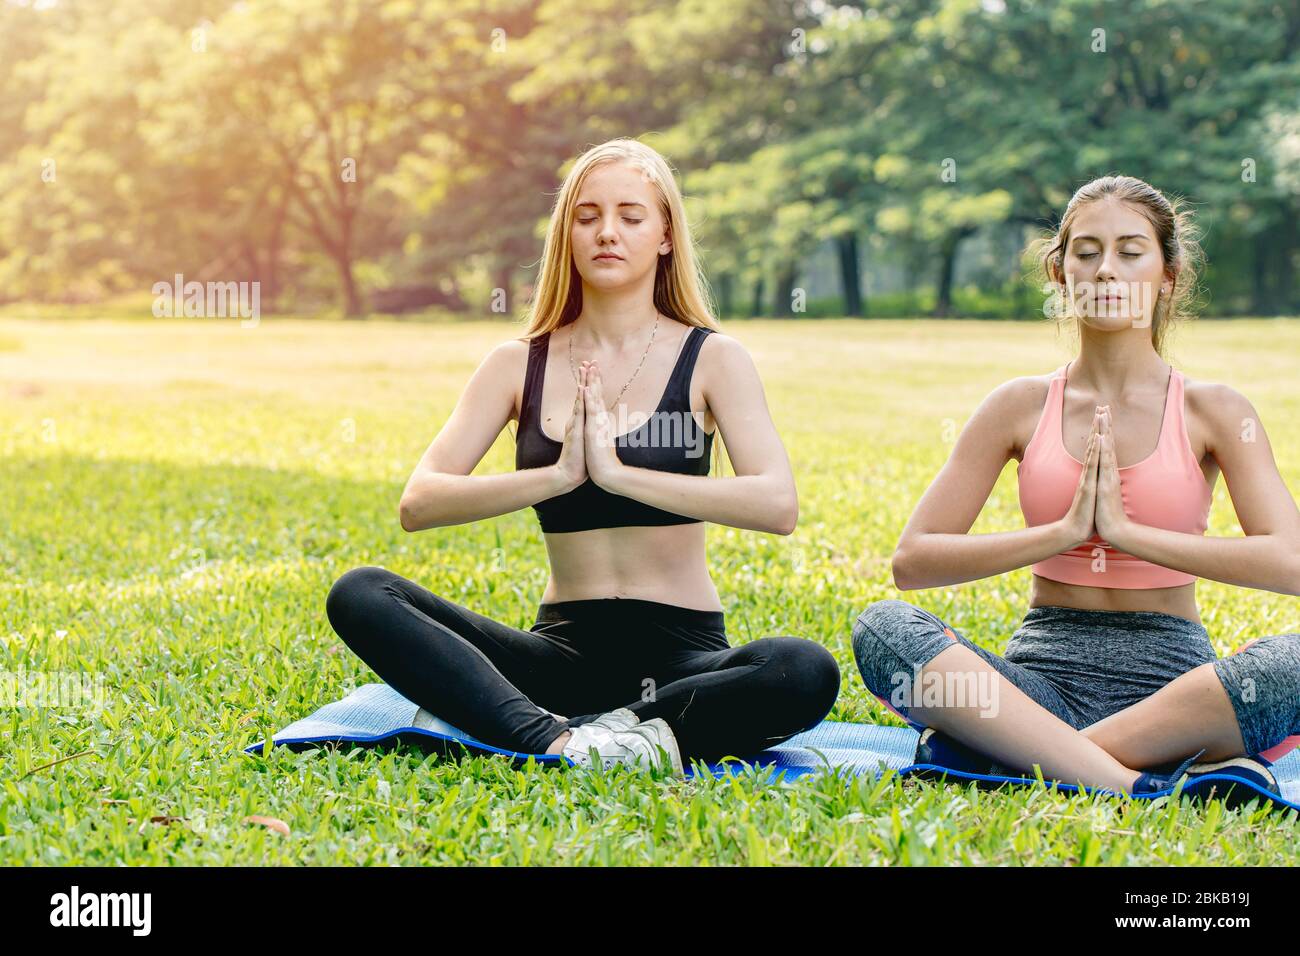 https://c8.alamy.com/comp/2BKB19J/beautiful-girls-teen-friend-do-yoga-for-healthy-in-green-park-holiday-sitting-hand-lotus-eyes-closed-concentration-posture-2BKB19J.jpg